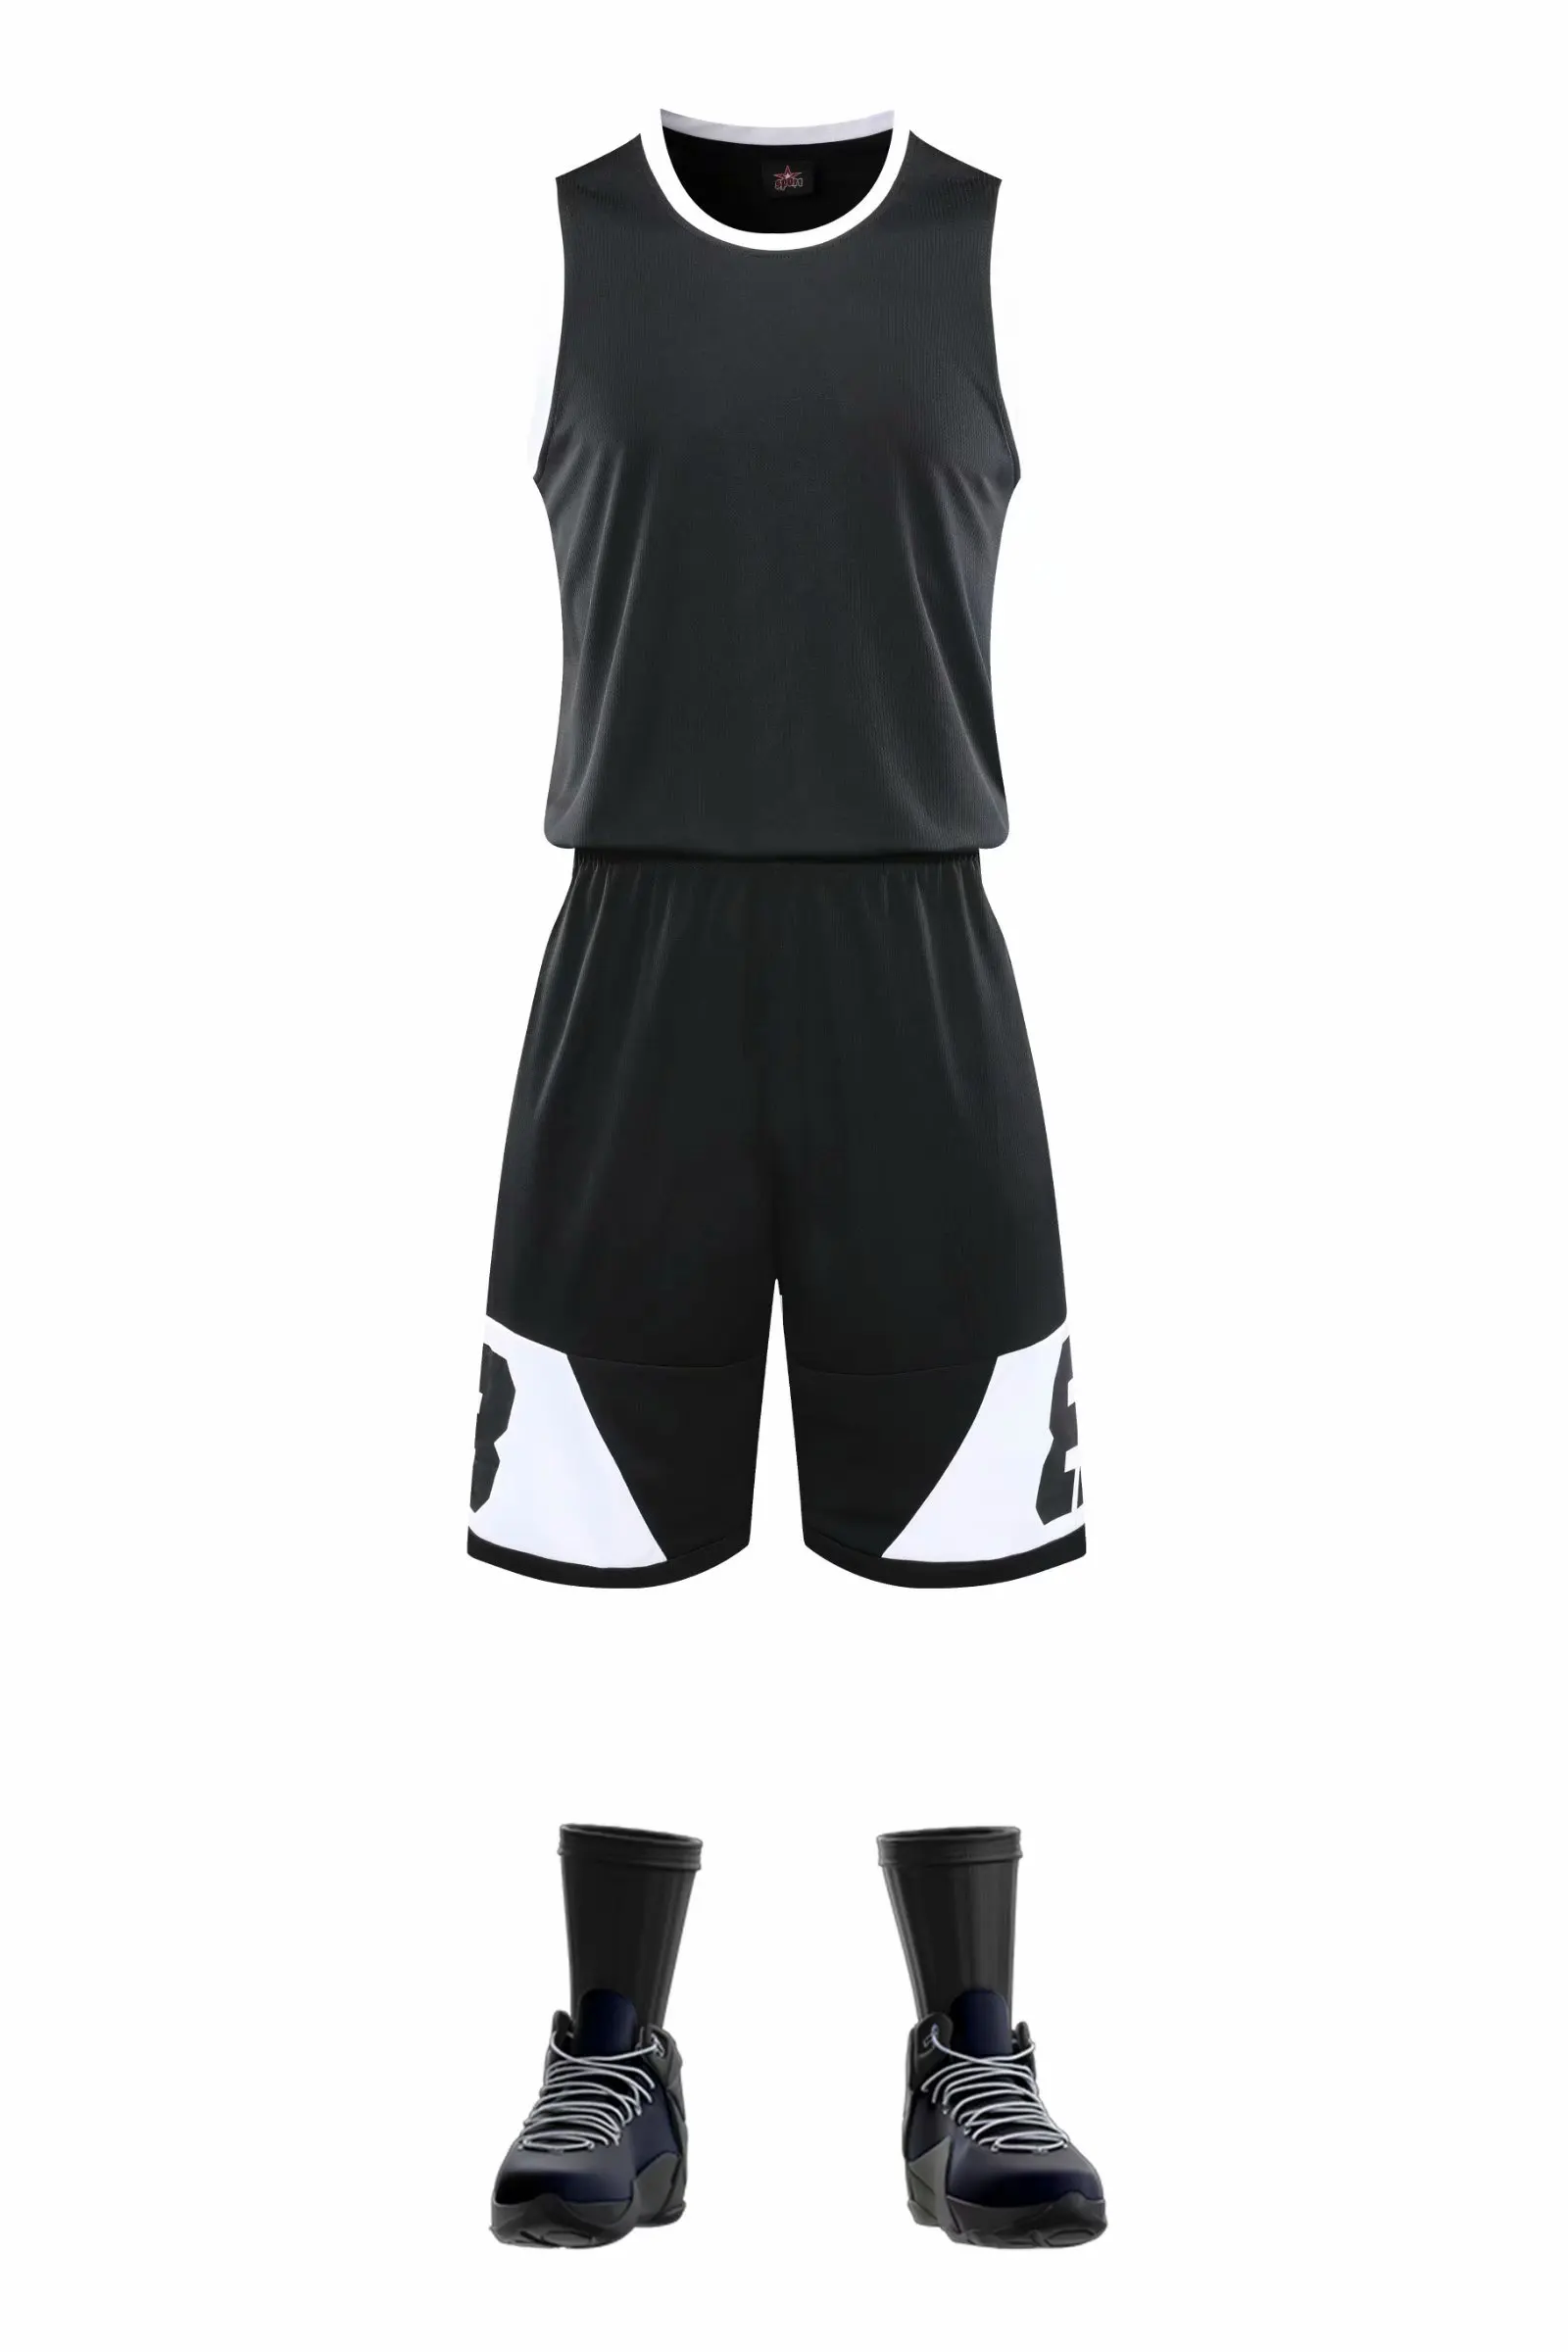 Game Gear AP993 Mens Tank Top Jersey-Uniform is Reversible to White-Great for Basketball 